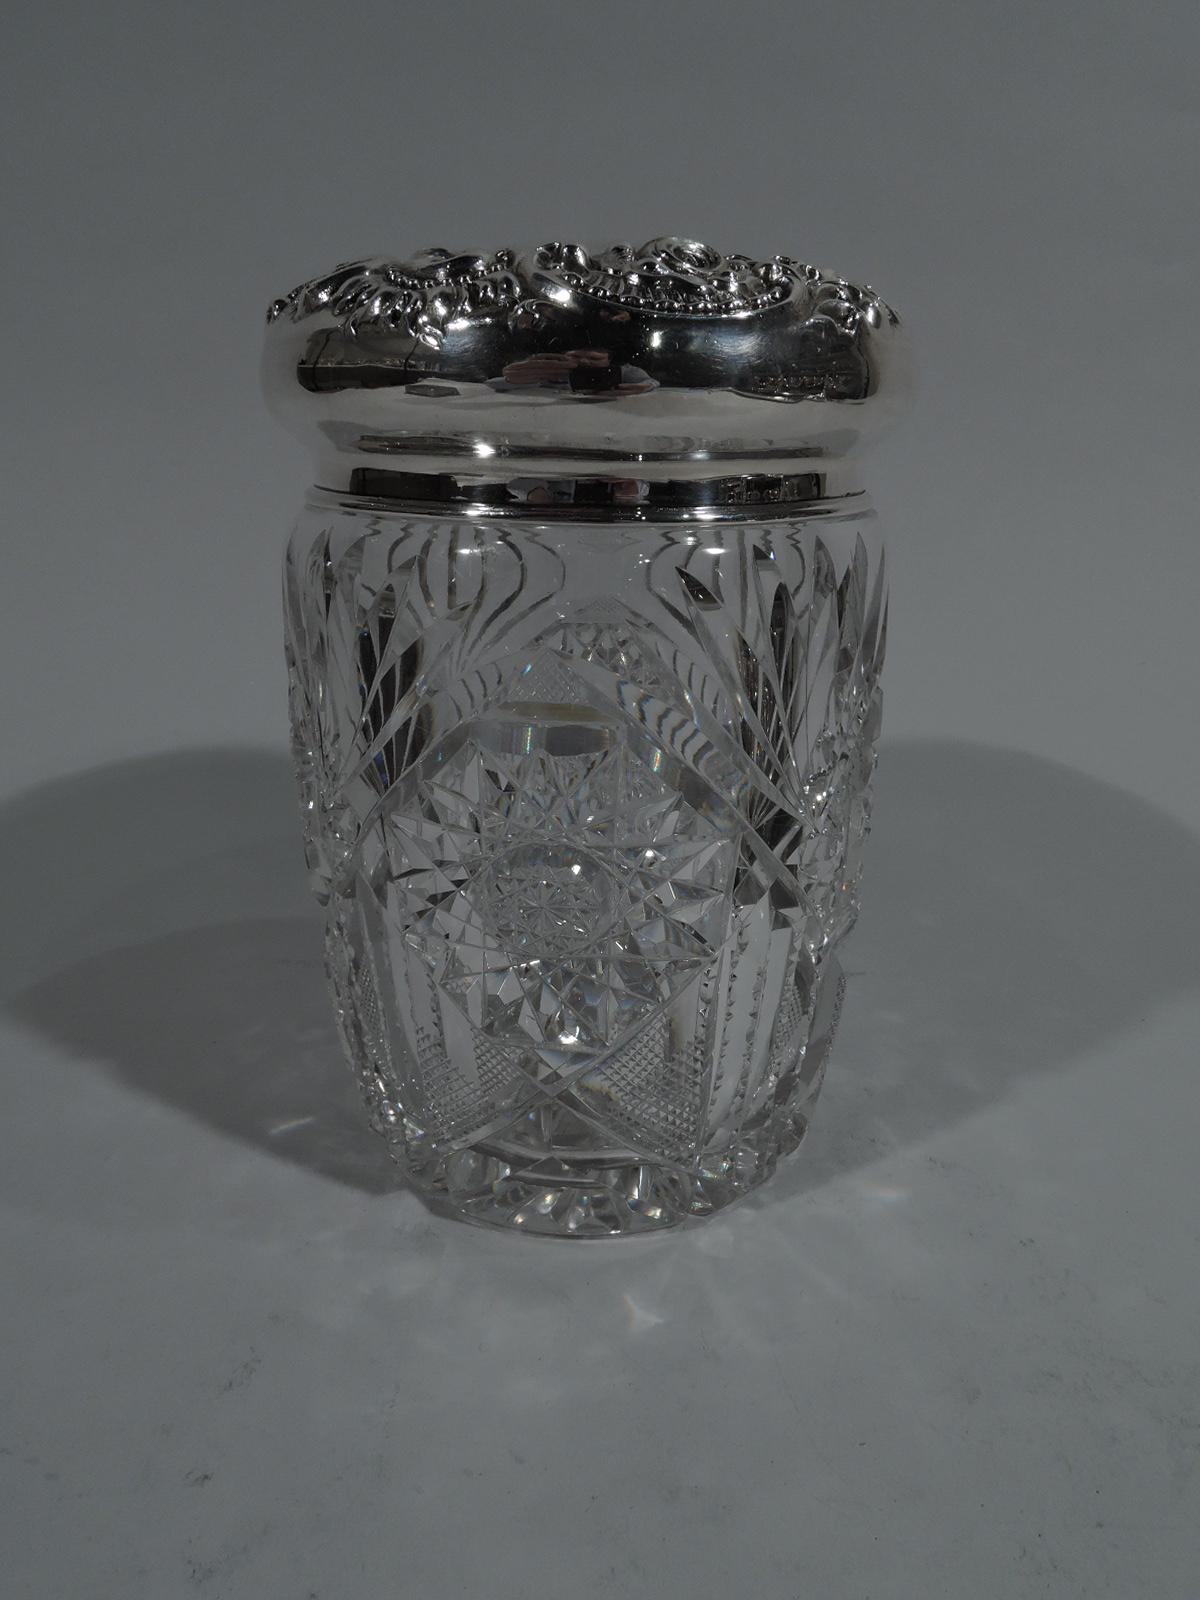 American brilliant-cut glass jar with sterling silver cover. Cylindrical with fans, stars, diaper, and facets. Cover curved with vacant centre bordered by repousse flowers and scrolls. Cover marked including stamp for Hamilton & Diesinger, a